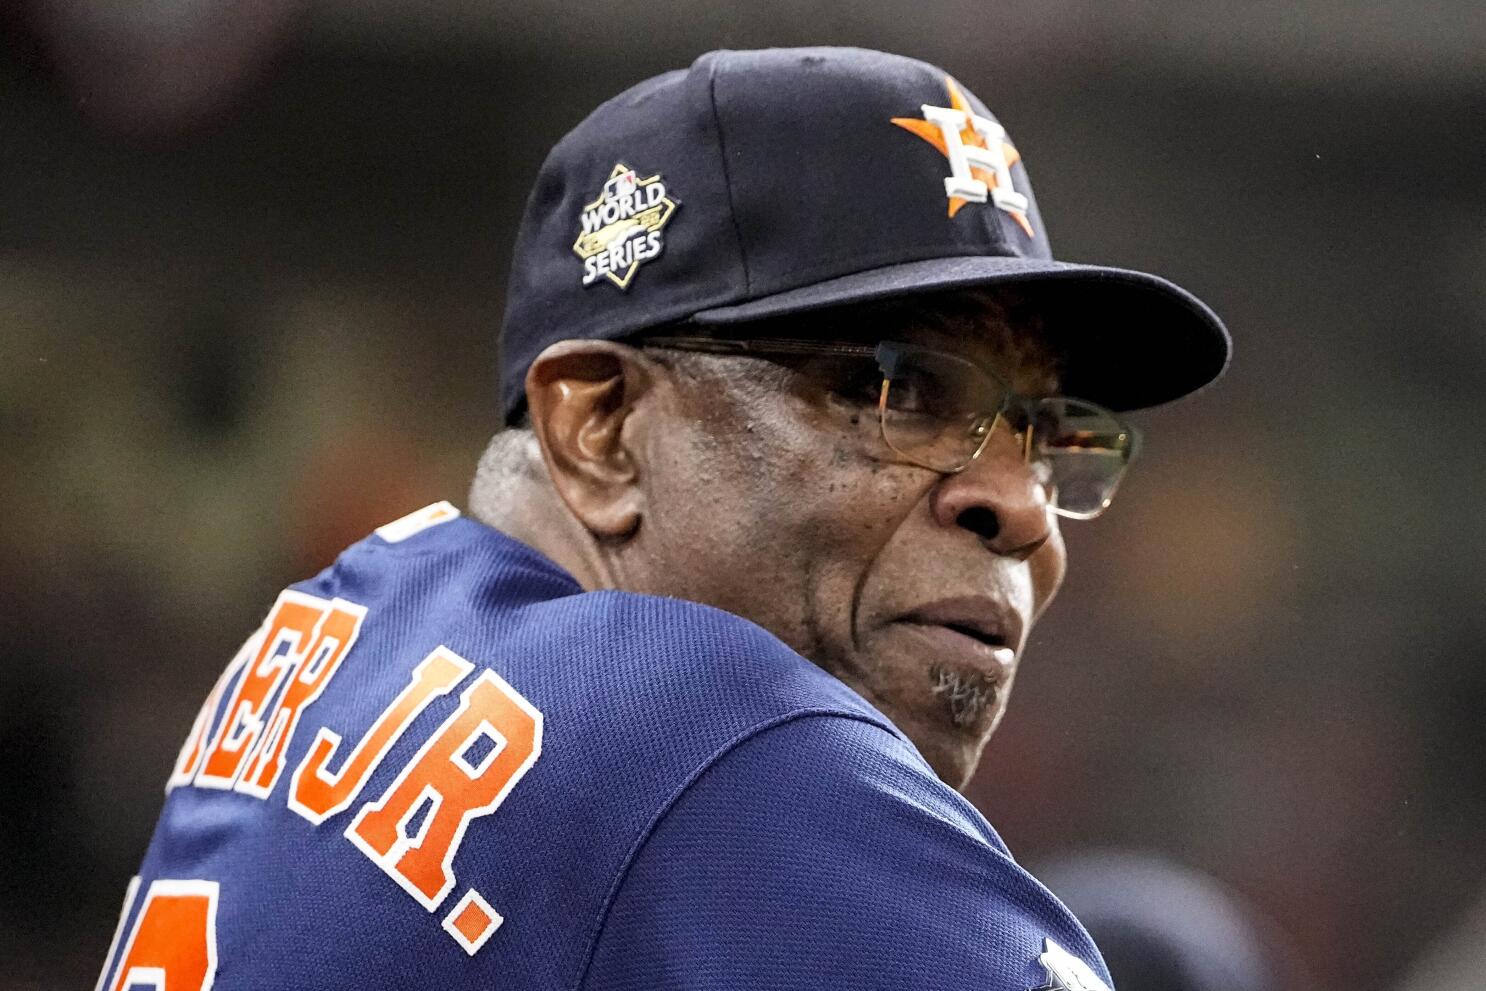 Dusty Baker's World Series title among best sports moments of 2022